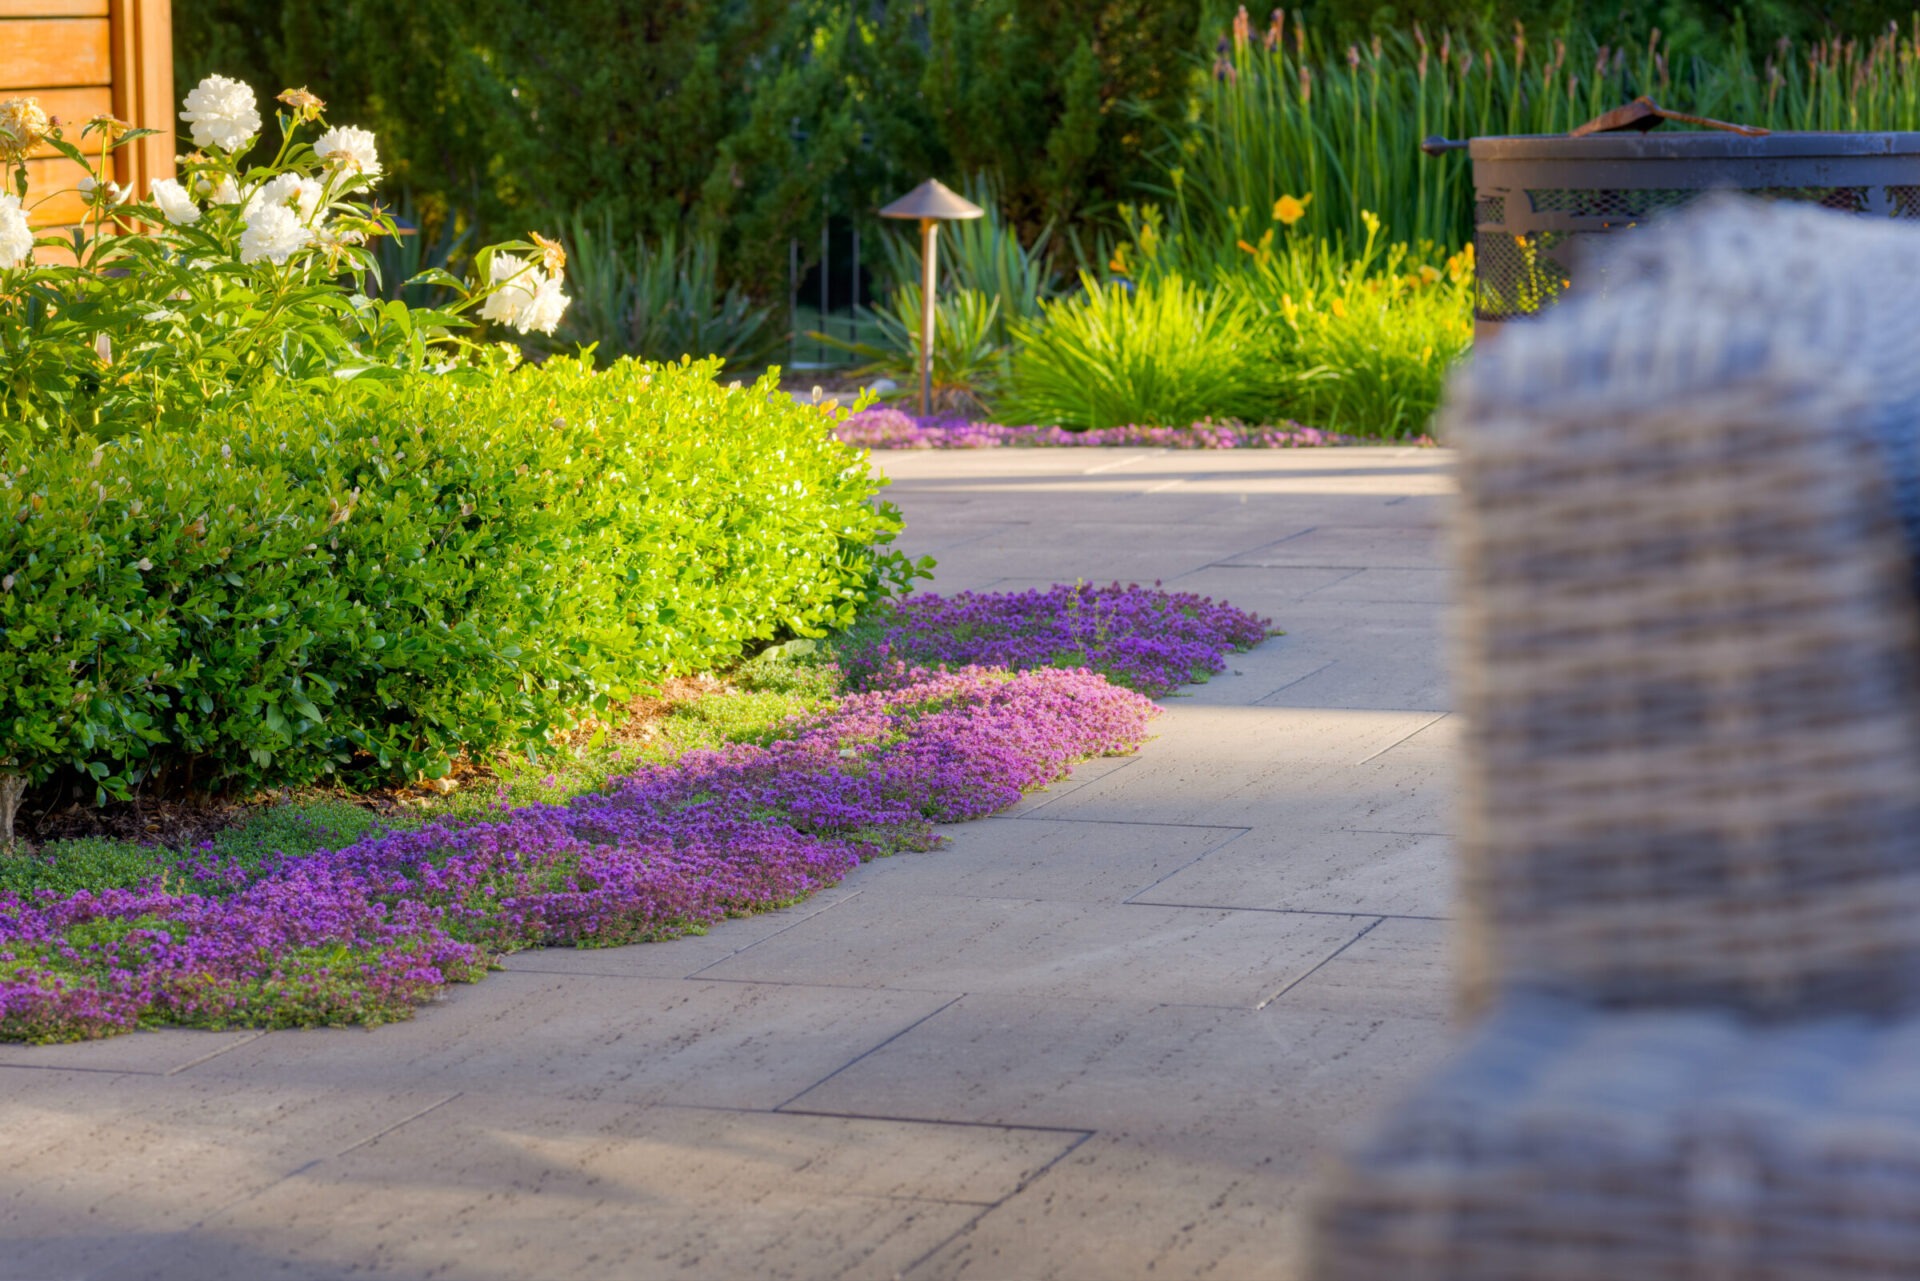 This image features a well-manicured garden path with purple flowers bordering green shrubs, a lamp post, and various plants under sunlight.